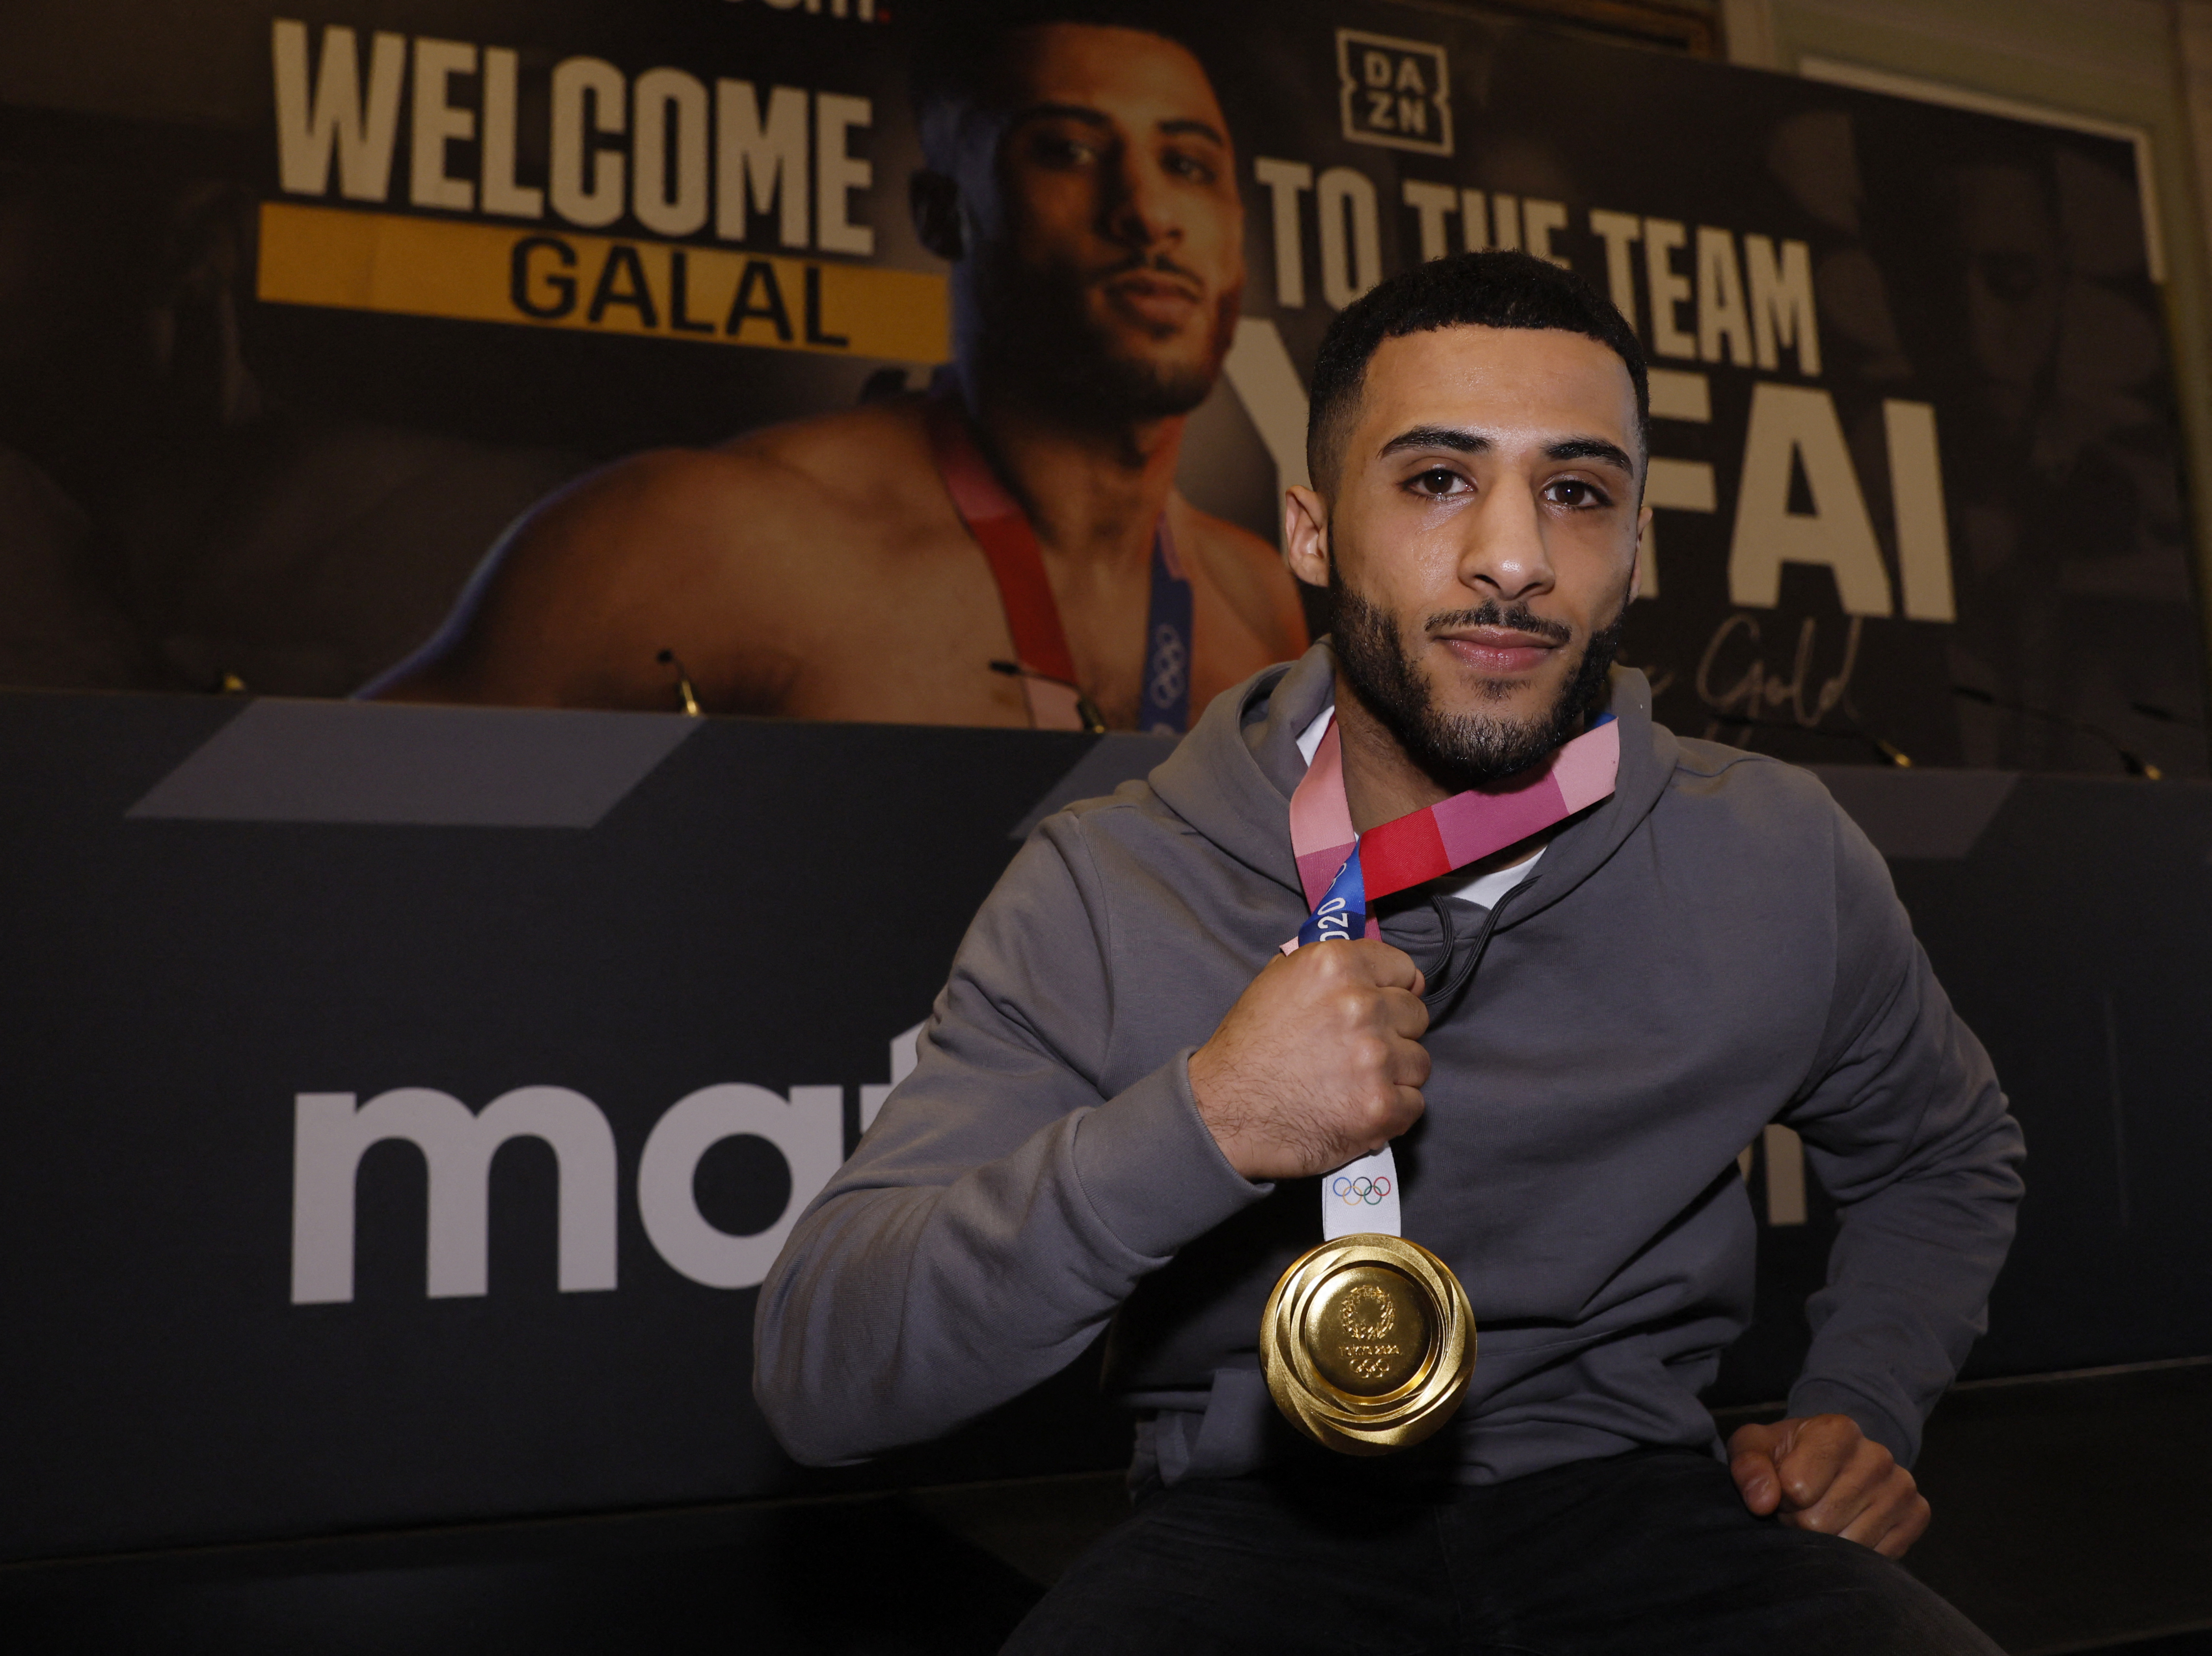 Boxing - Lawrence Okolie & MIchal Cieslak Press Conference - London, Britain - January 27, 2022  Galal Yafai poses with his Olympic gold medal during the press conference Action Images via Reuters/Andrew Couldridge